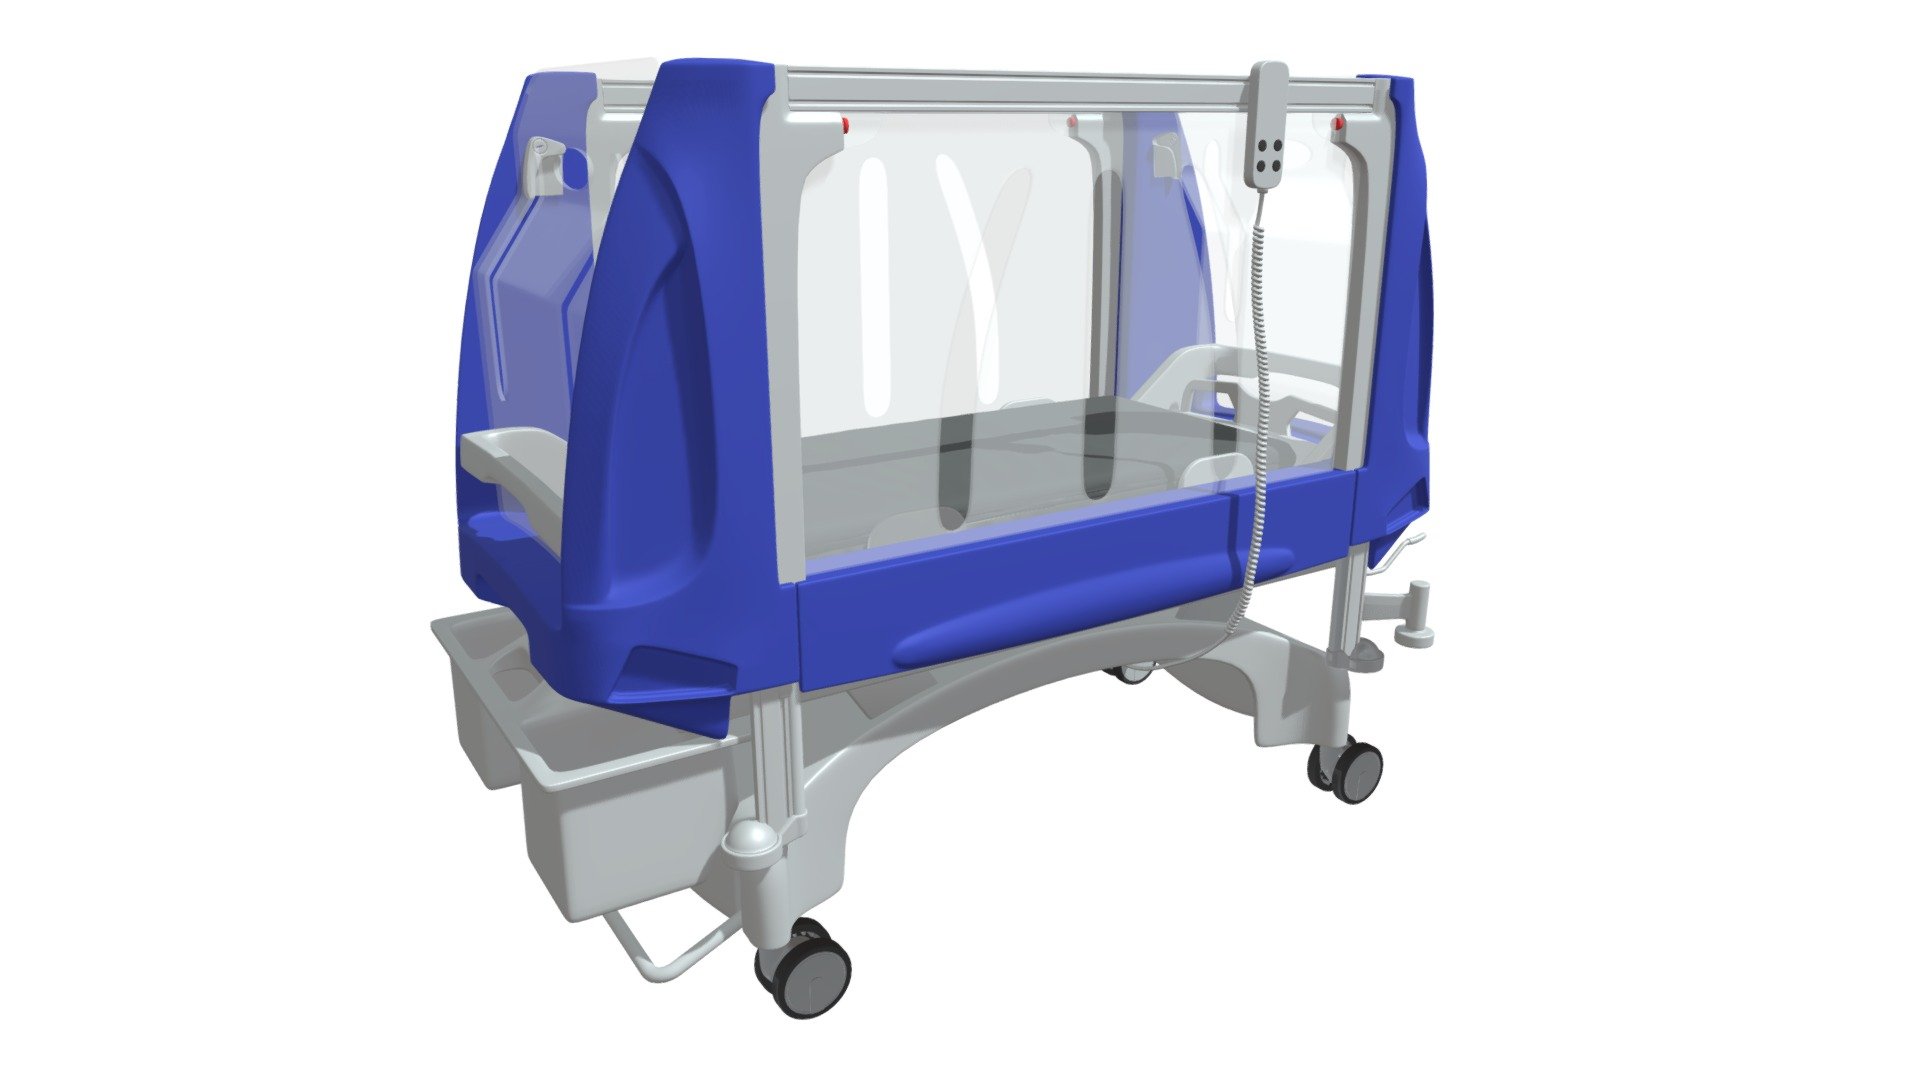 High quality 3d model of pediatric medical hospital bed.
Colors can be easily modified 3d model